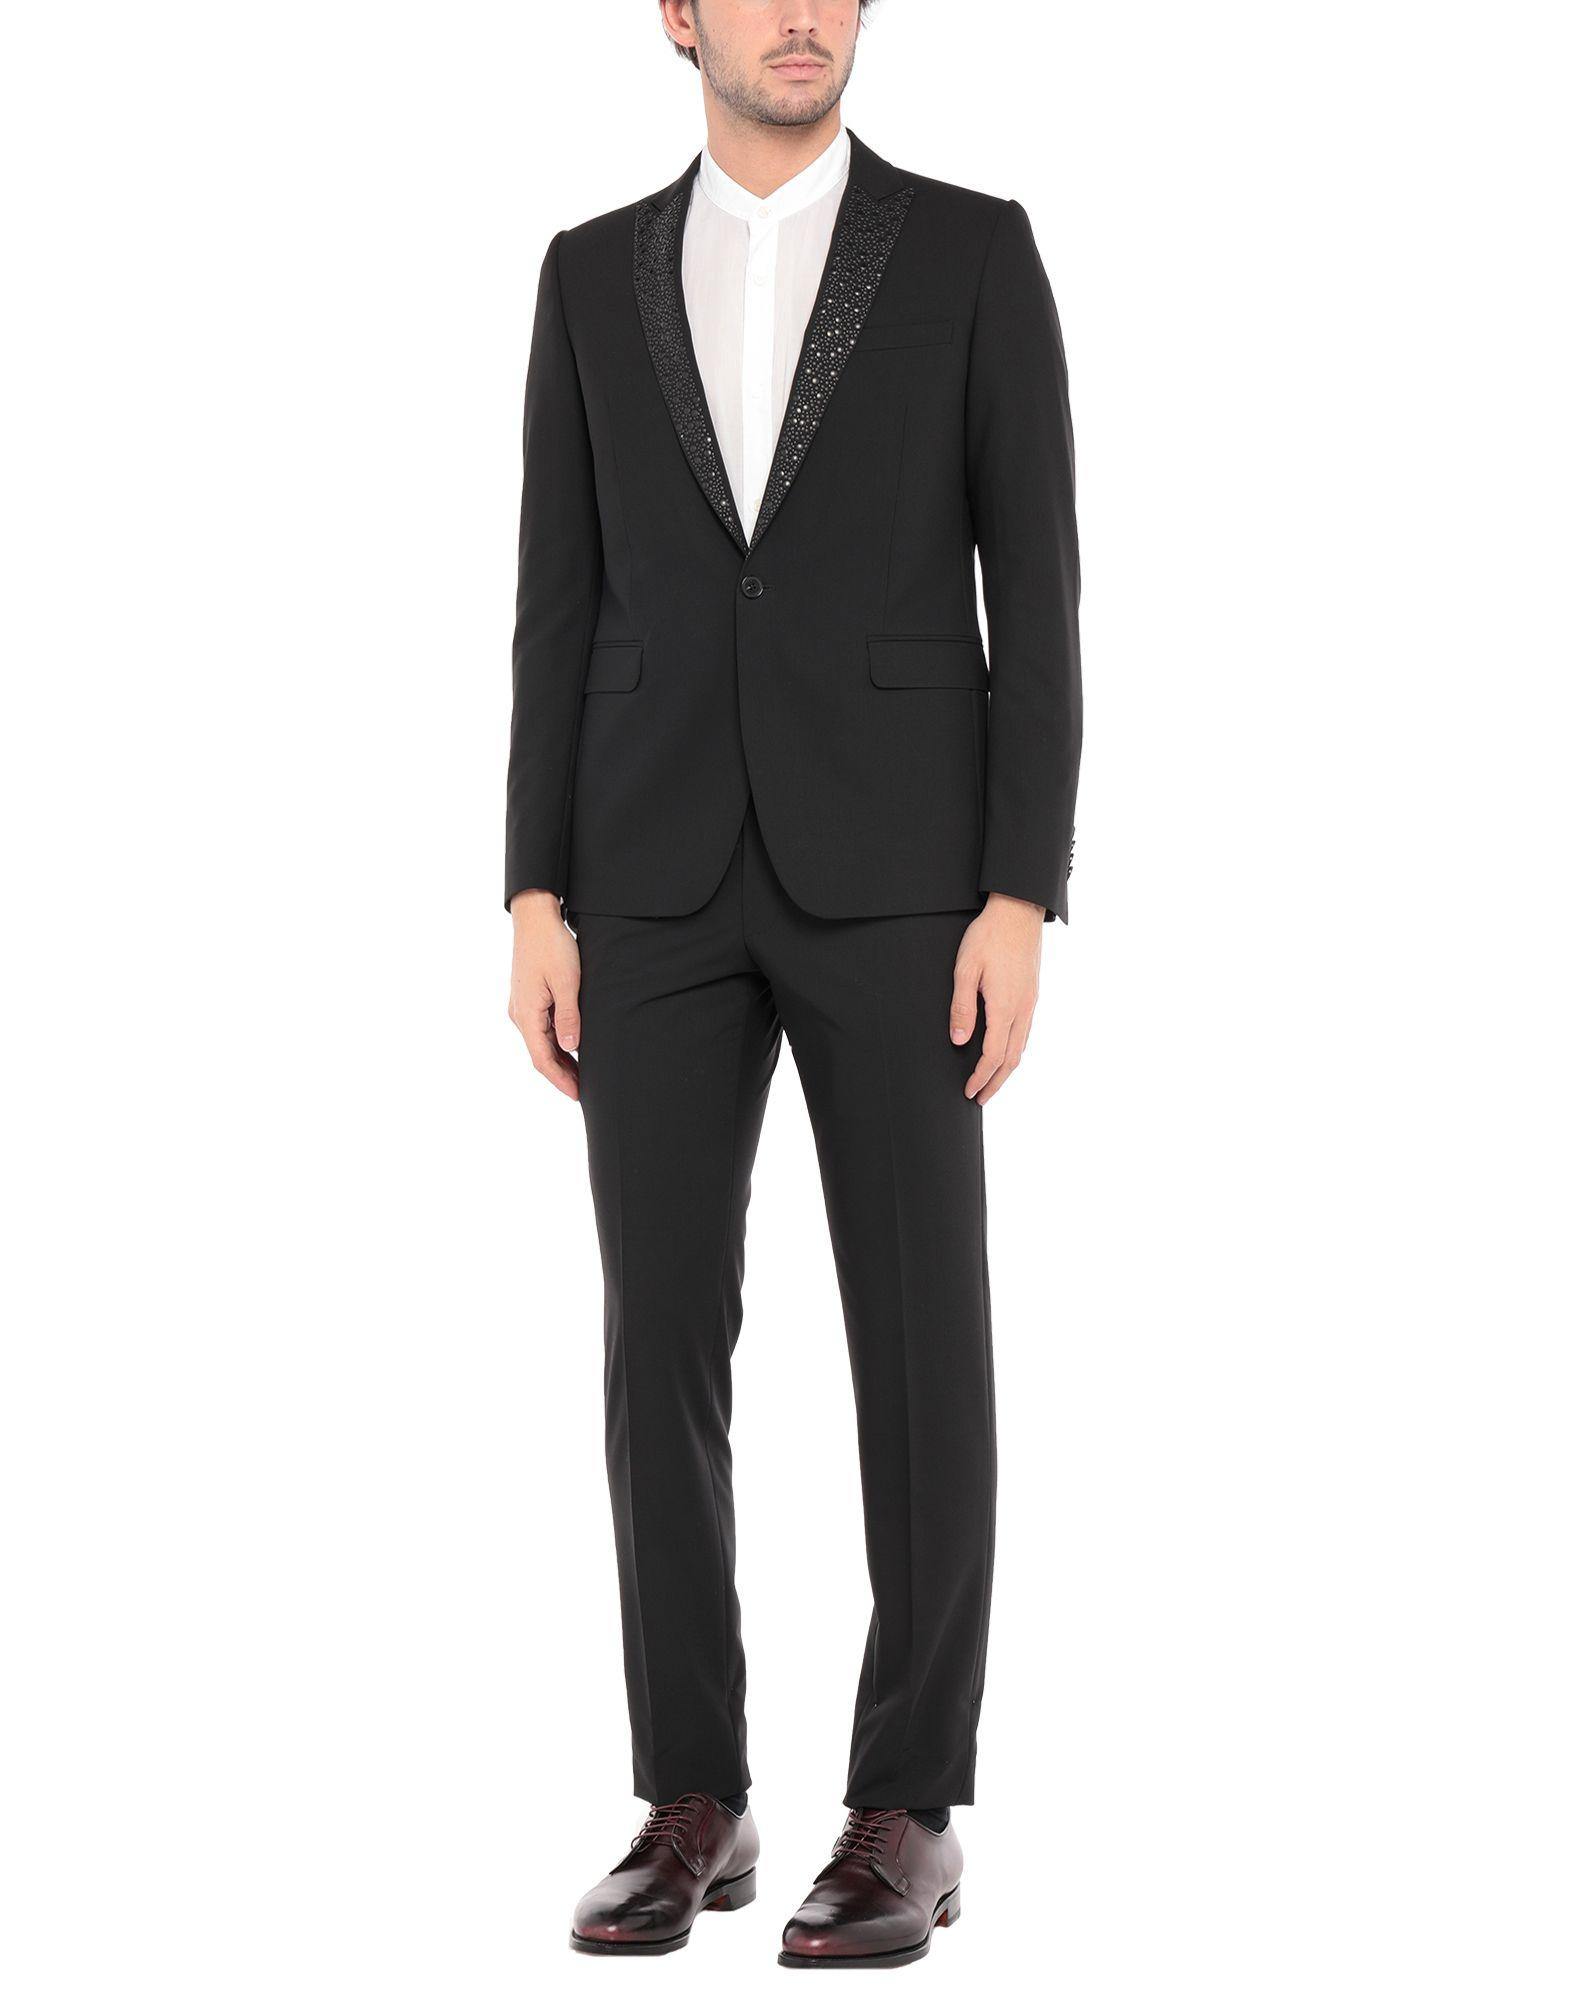 Tombolini Synthetic Suit in Black for Men - Lyst